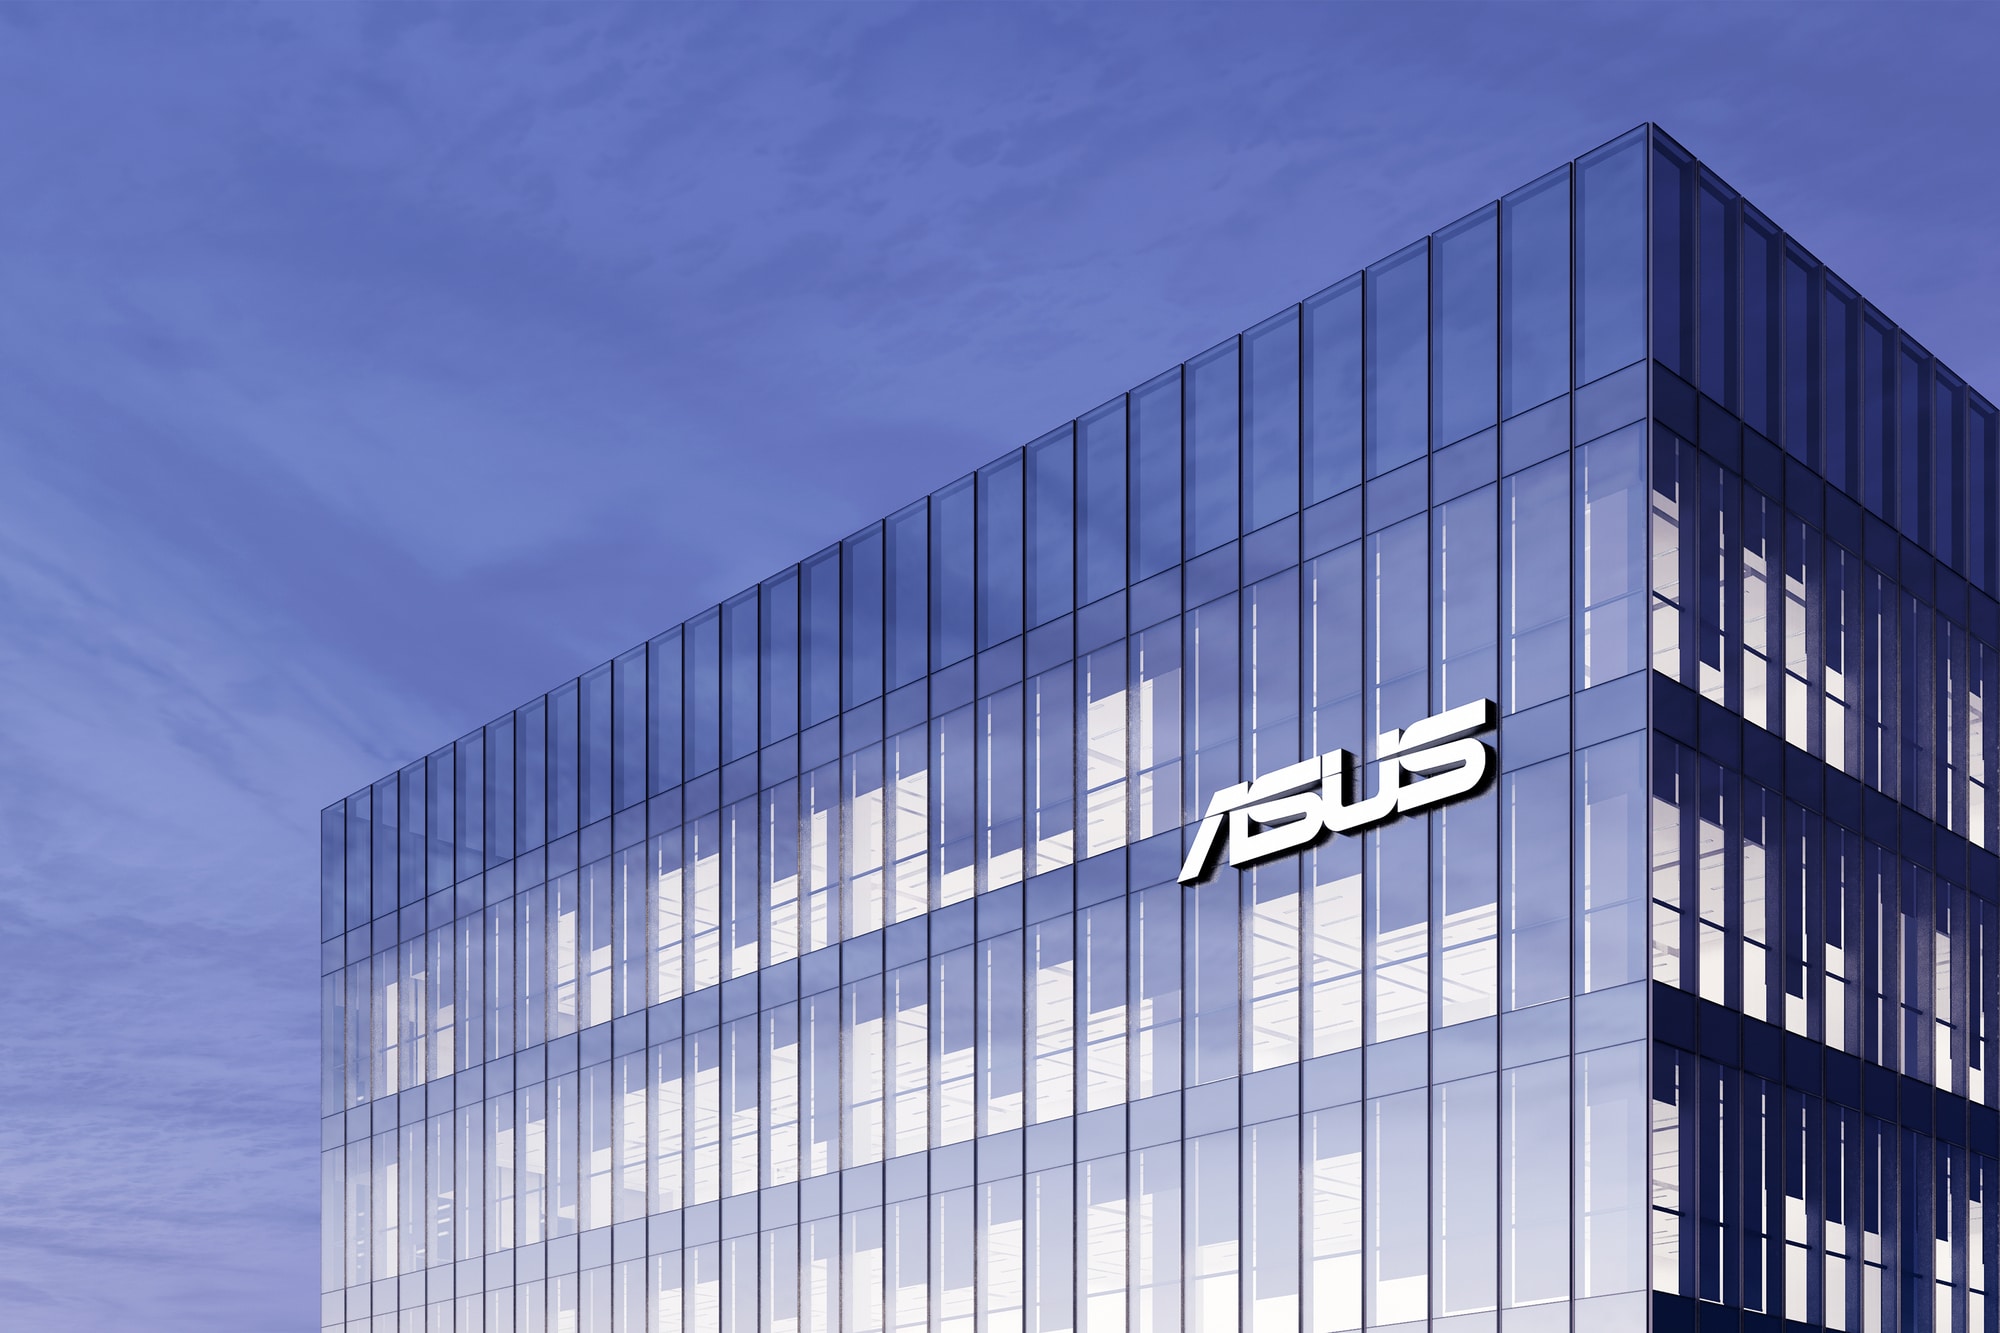 ASUS gets the highest security rating for five thumbnail WiFi routers